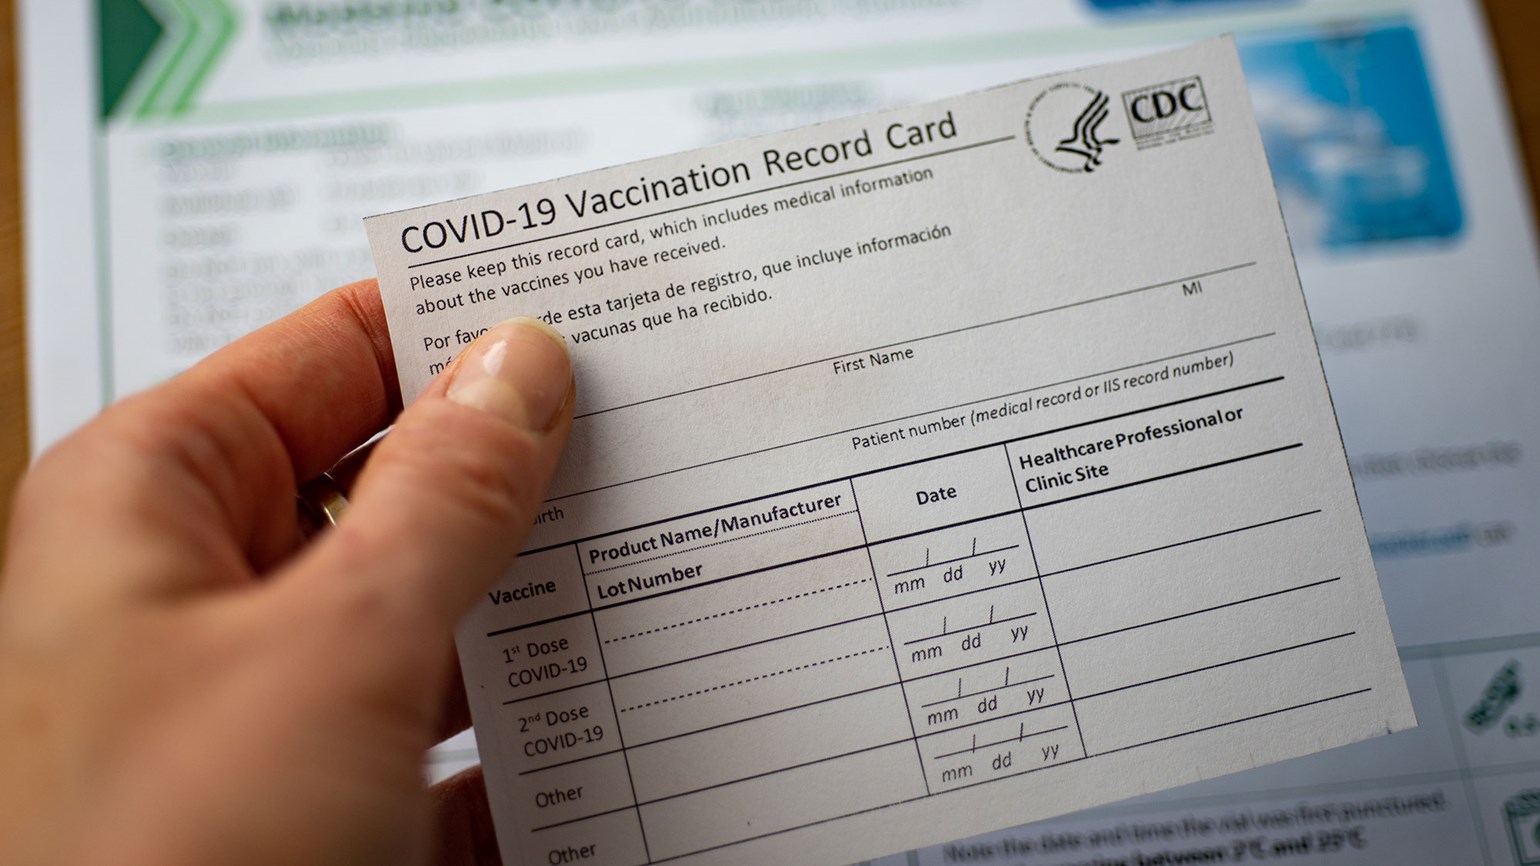 Why should not put your COVID-19 vaccination certificate on social media, know this thing